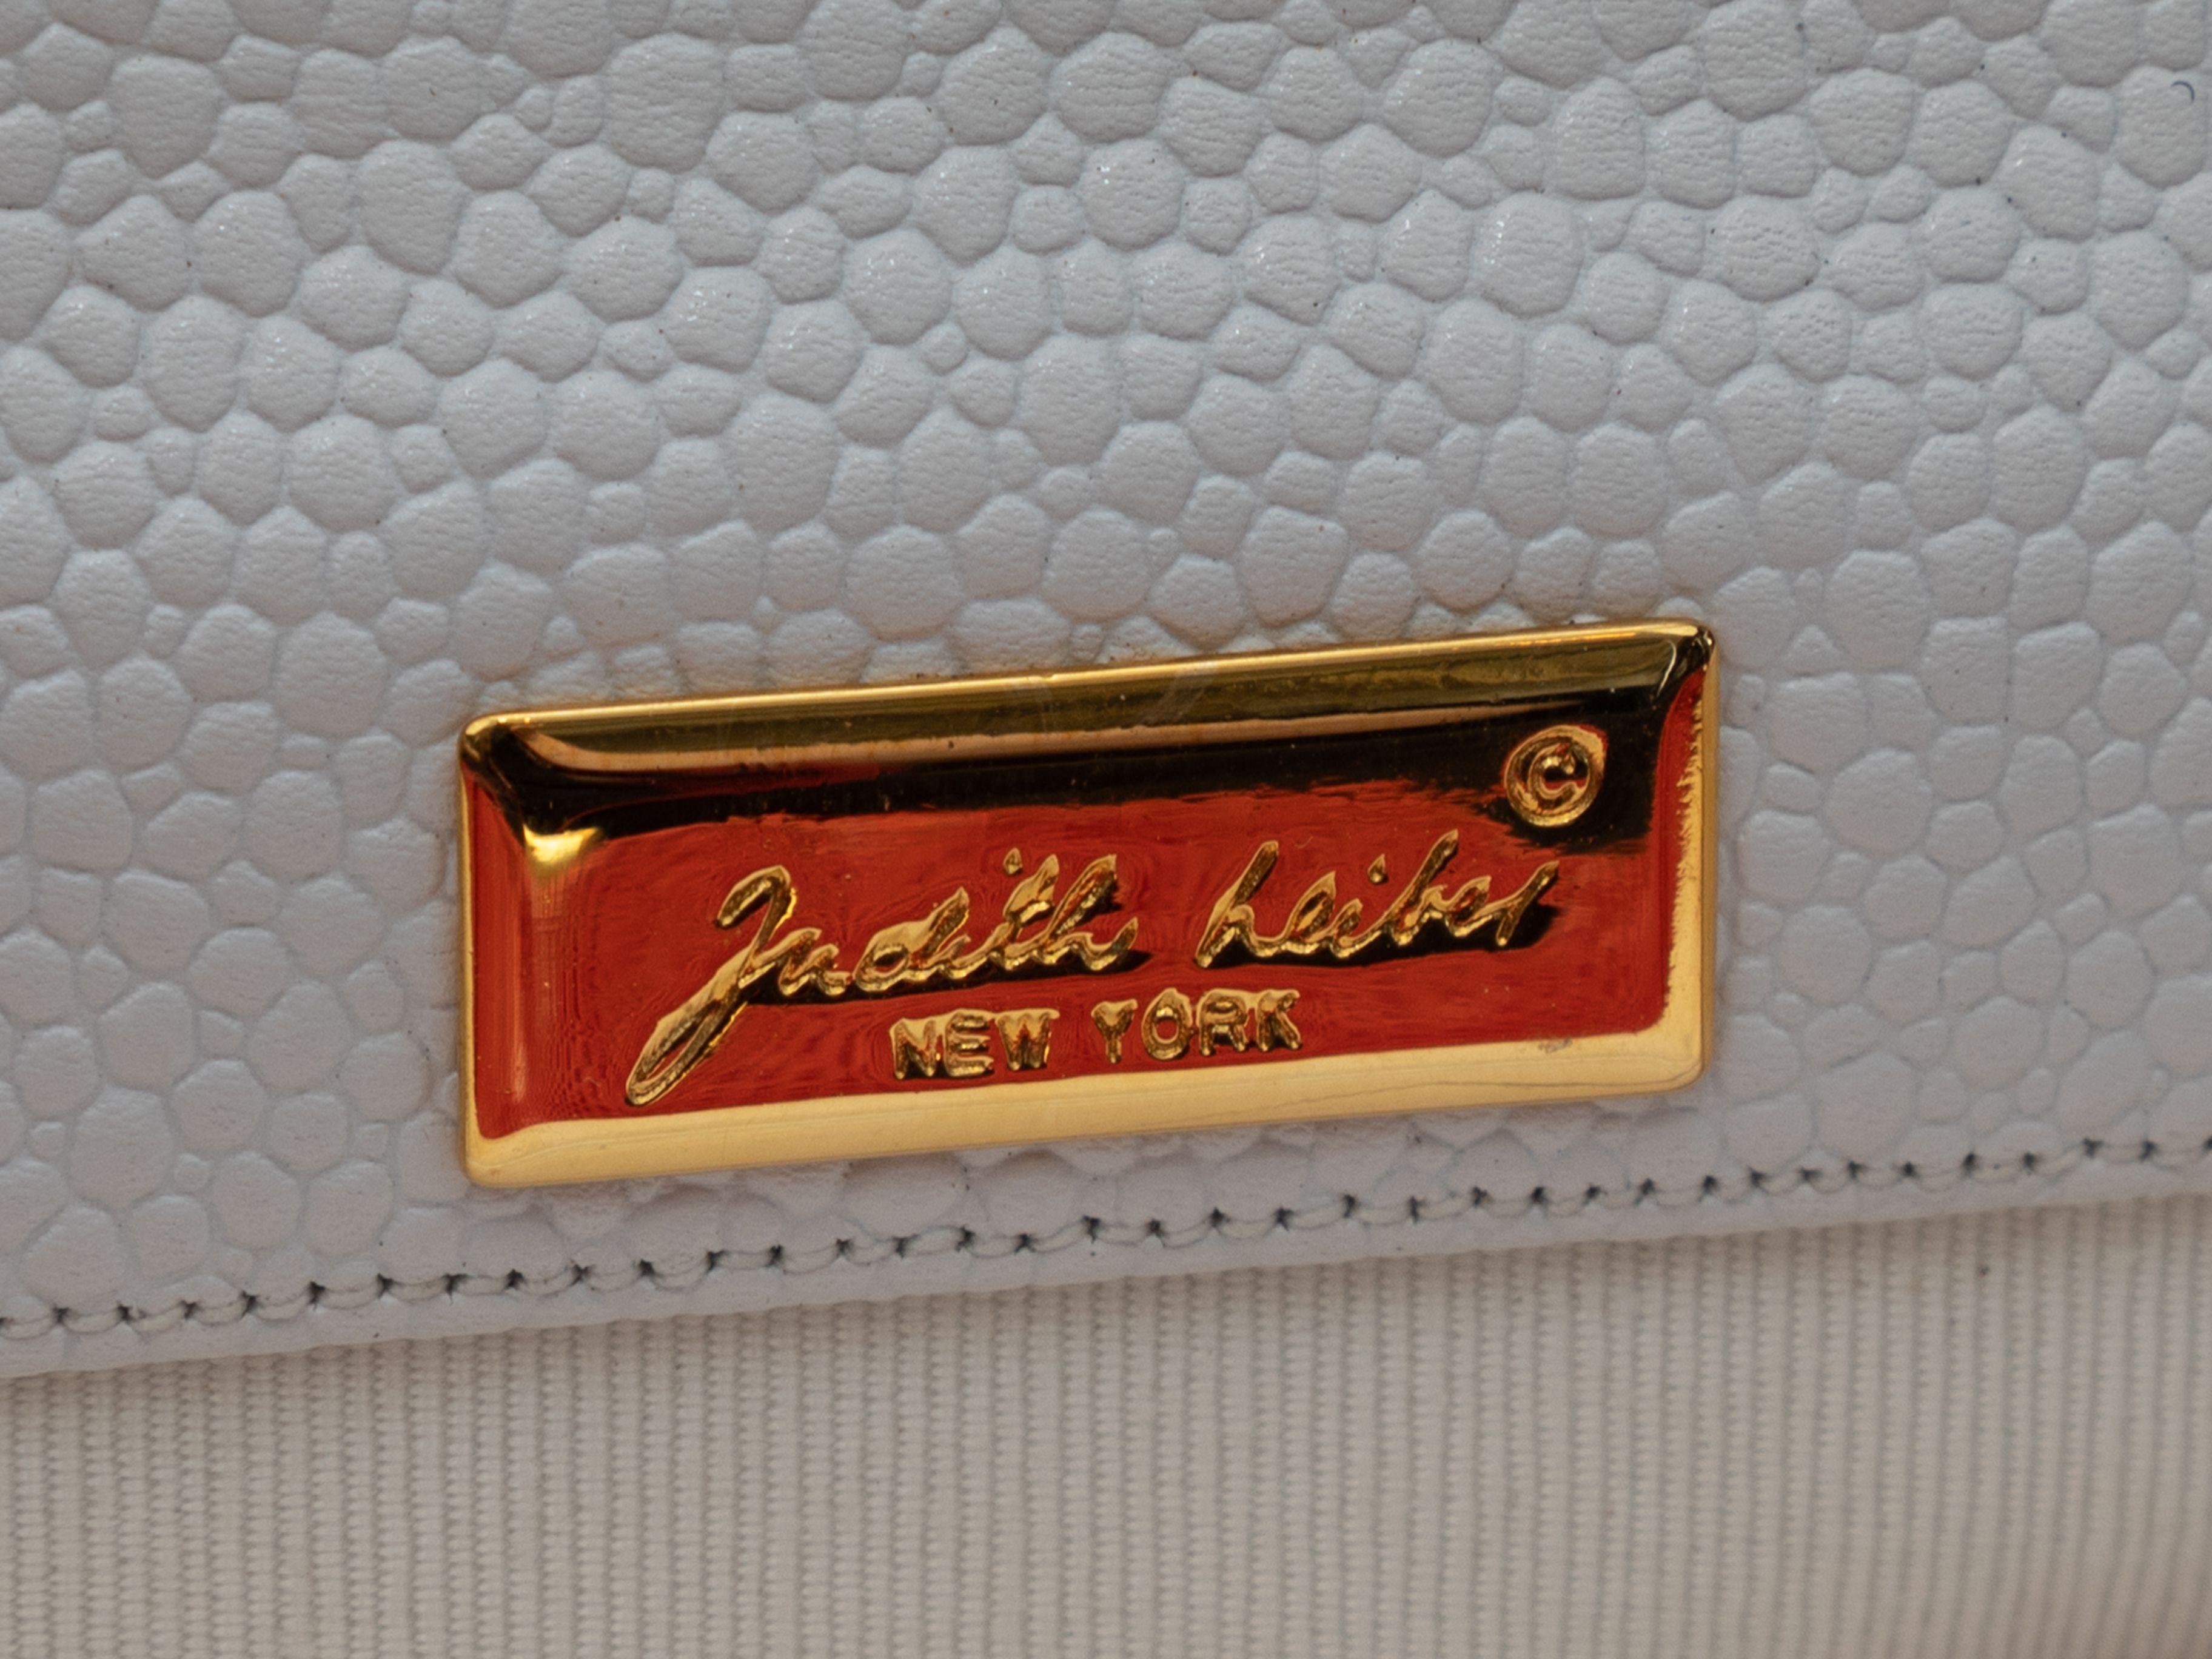 Product Details: White & Red Trim Judith Leiber Leather Shoulder Bag. This bag features a leather body, lizard skin trim, gold-tone hardware, a grosgrain interior, a front buckle accent, and dual flat shoulder straps. 12.25